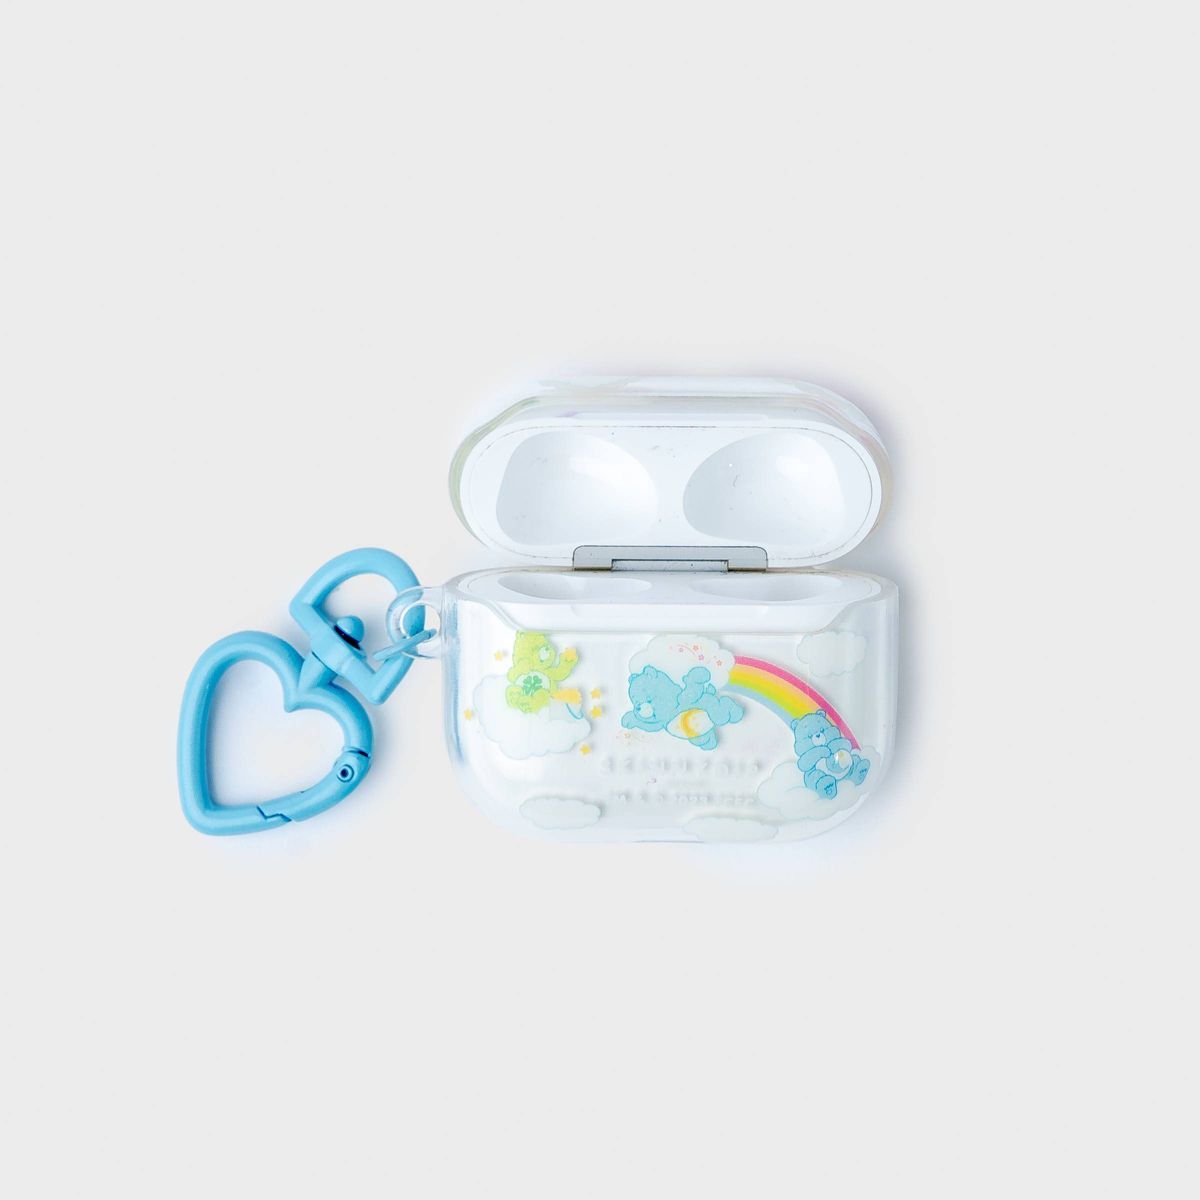 Care Bears X Skinnydip Graphic AirPods Case | Target